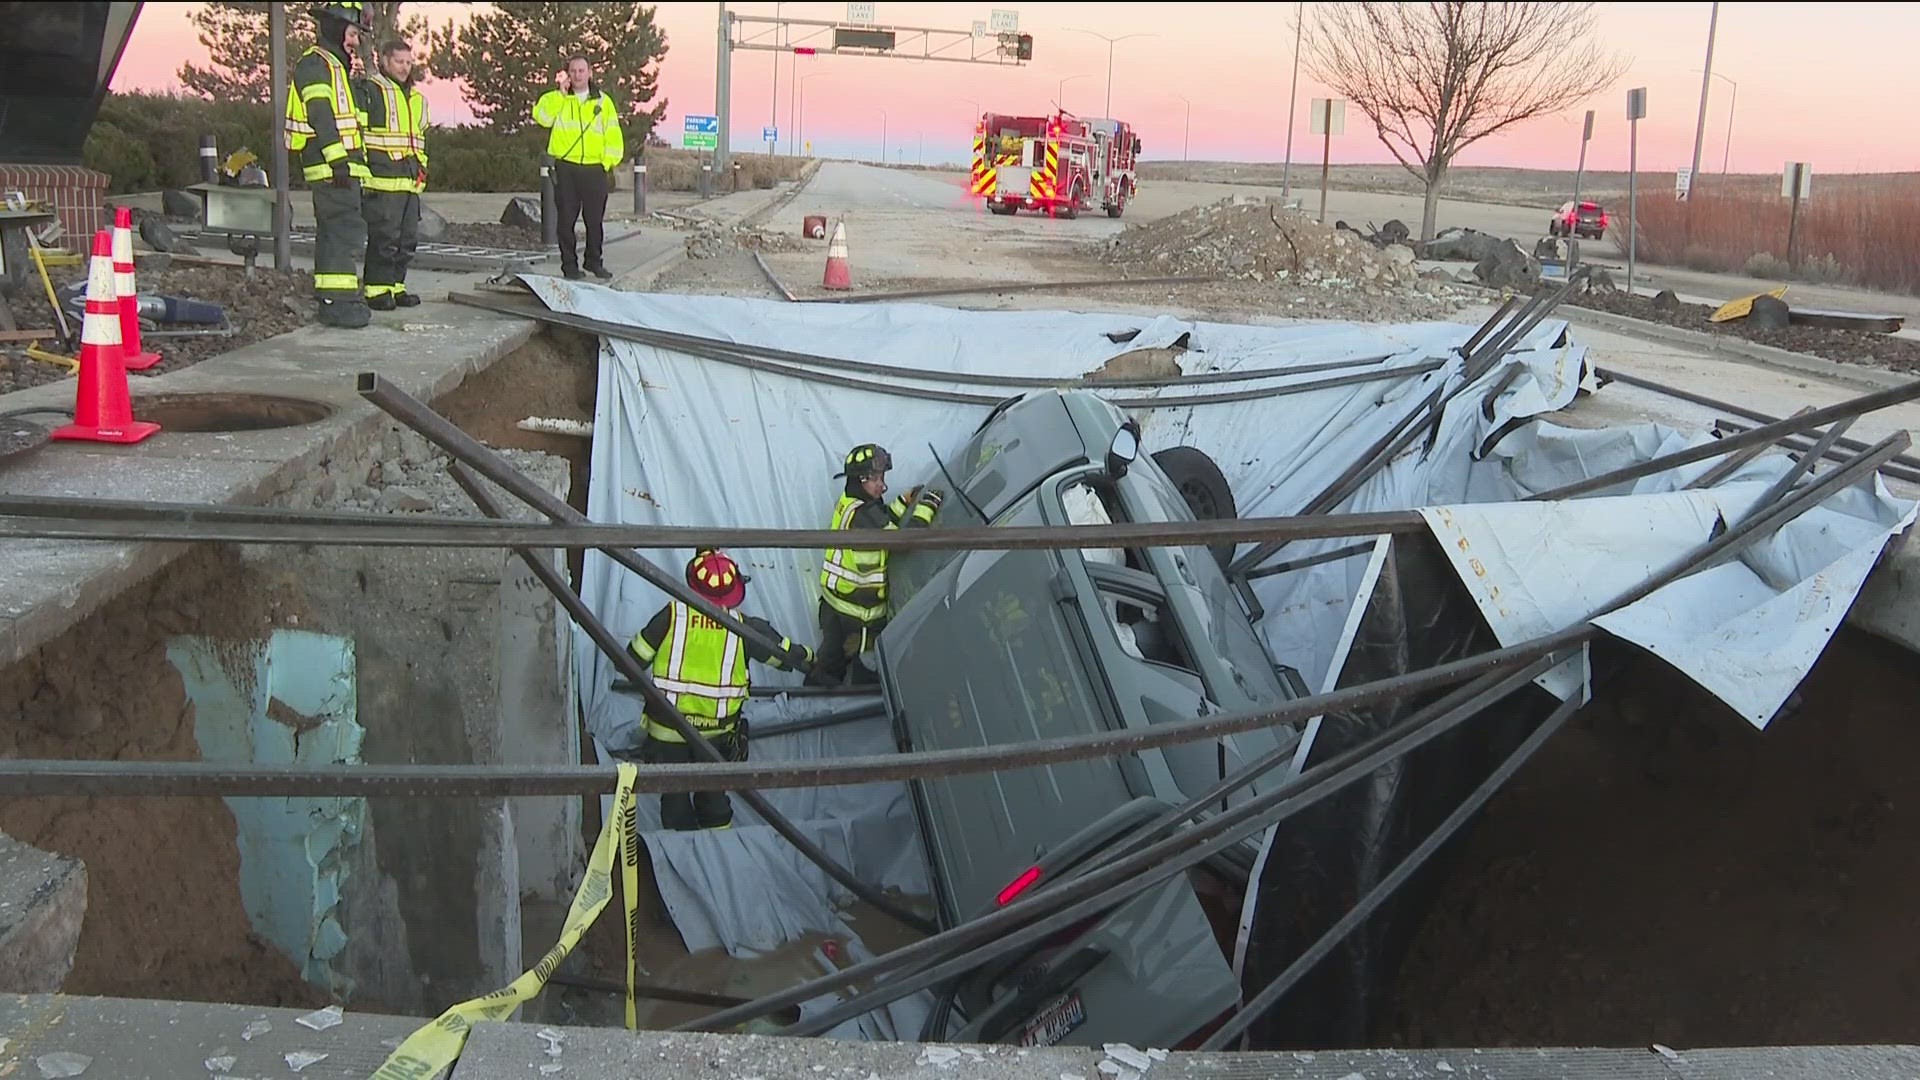 Police said the man was driving 100 mph during the chase towards Boise, before entering a closed construction zone and crashing into a large hole.